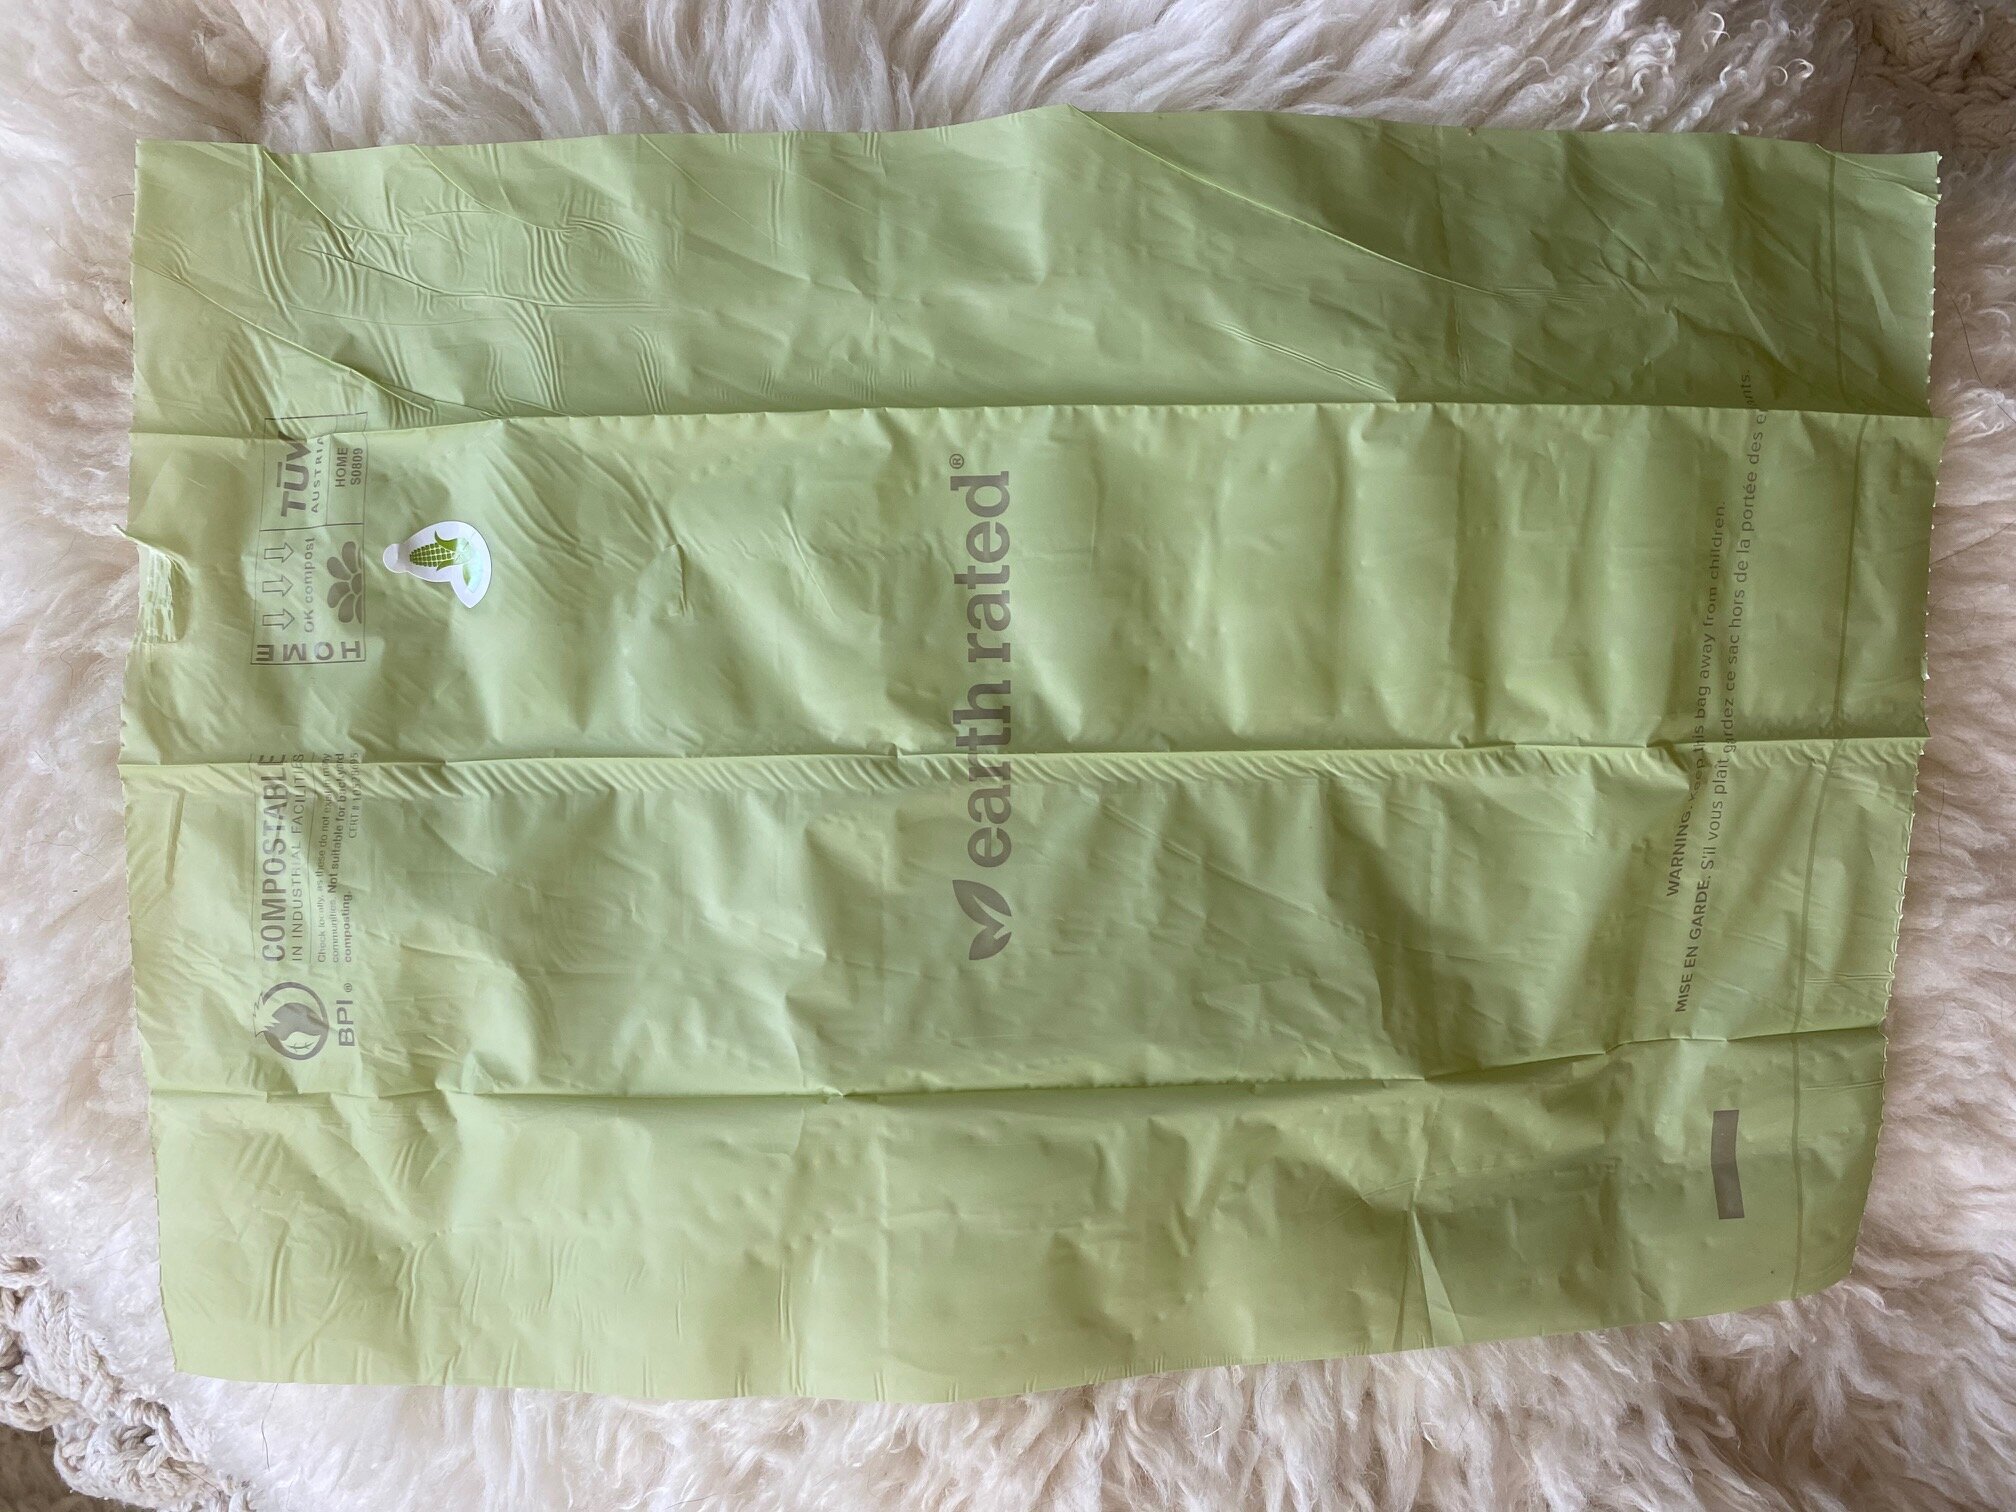 We tried Earth Rated's Certified Compostable Dog Poo Bags, and